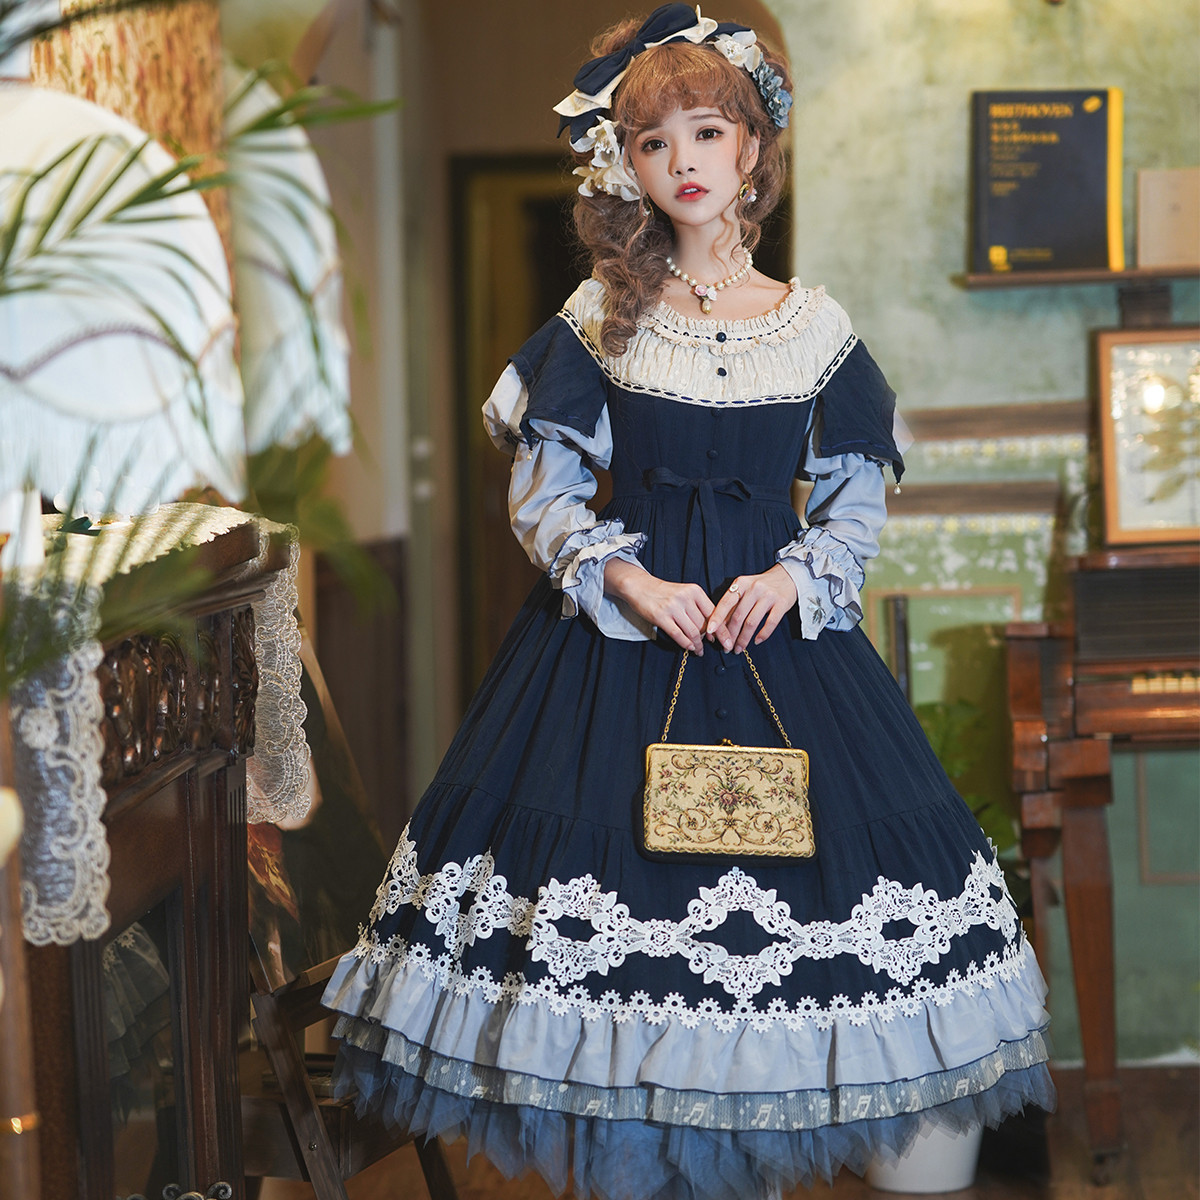 US$ 101.99 - The Song of April Classic Vintage Lolita OP - www ...